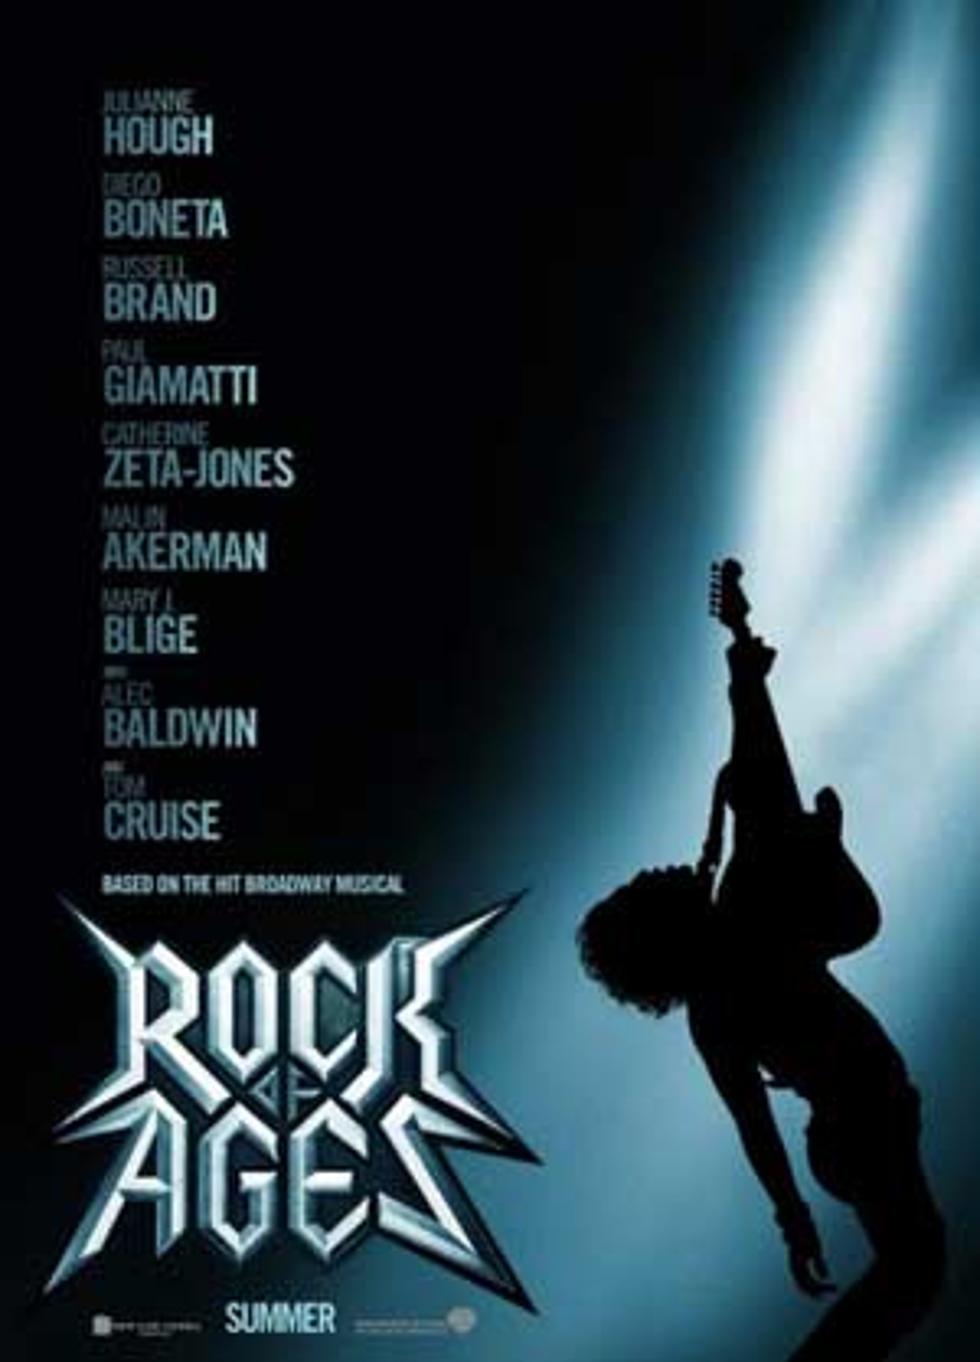 Journey and Night Ranger Music Featured in &#8216;Rock of Ages&#8217; Trailer